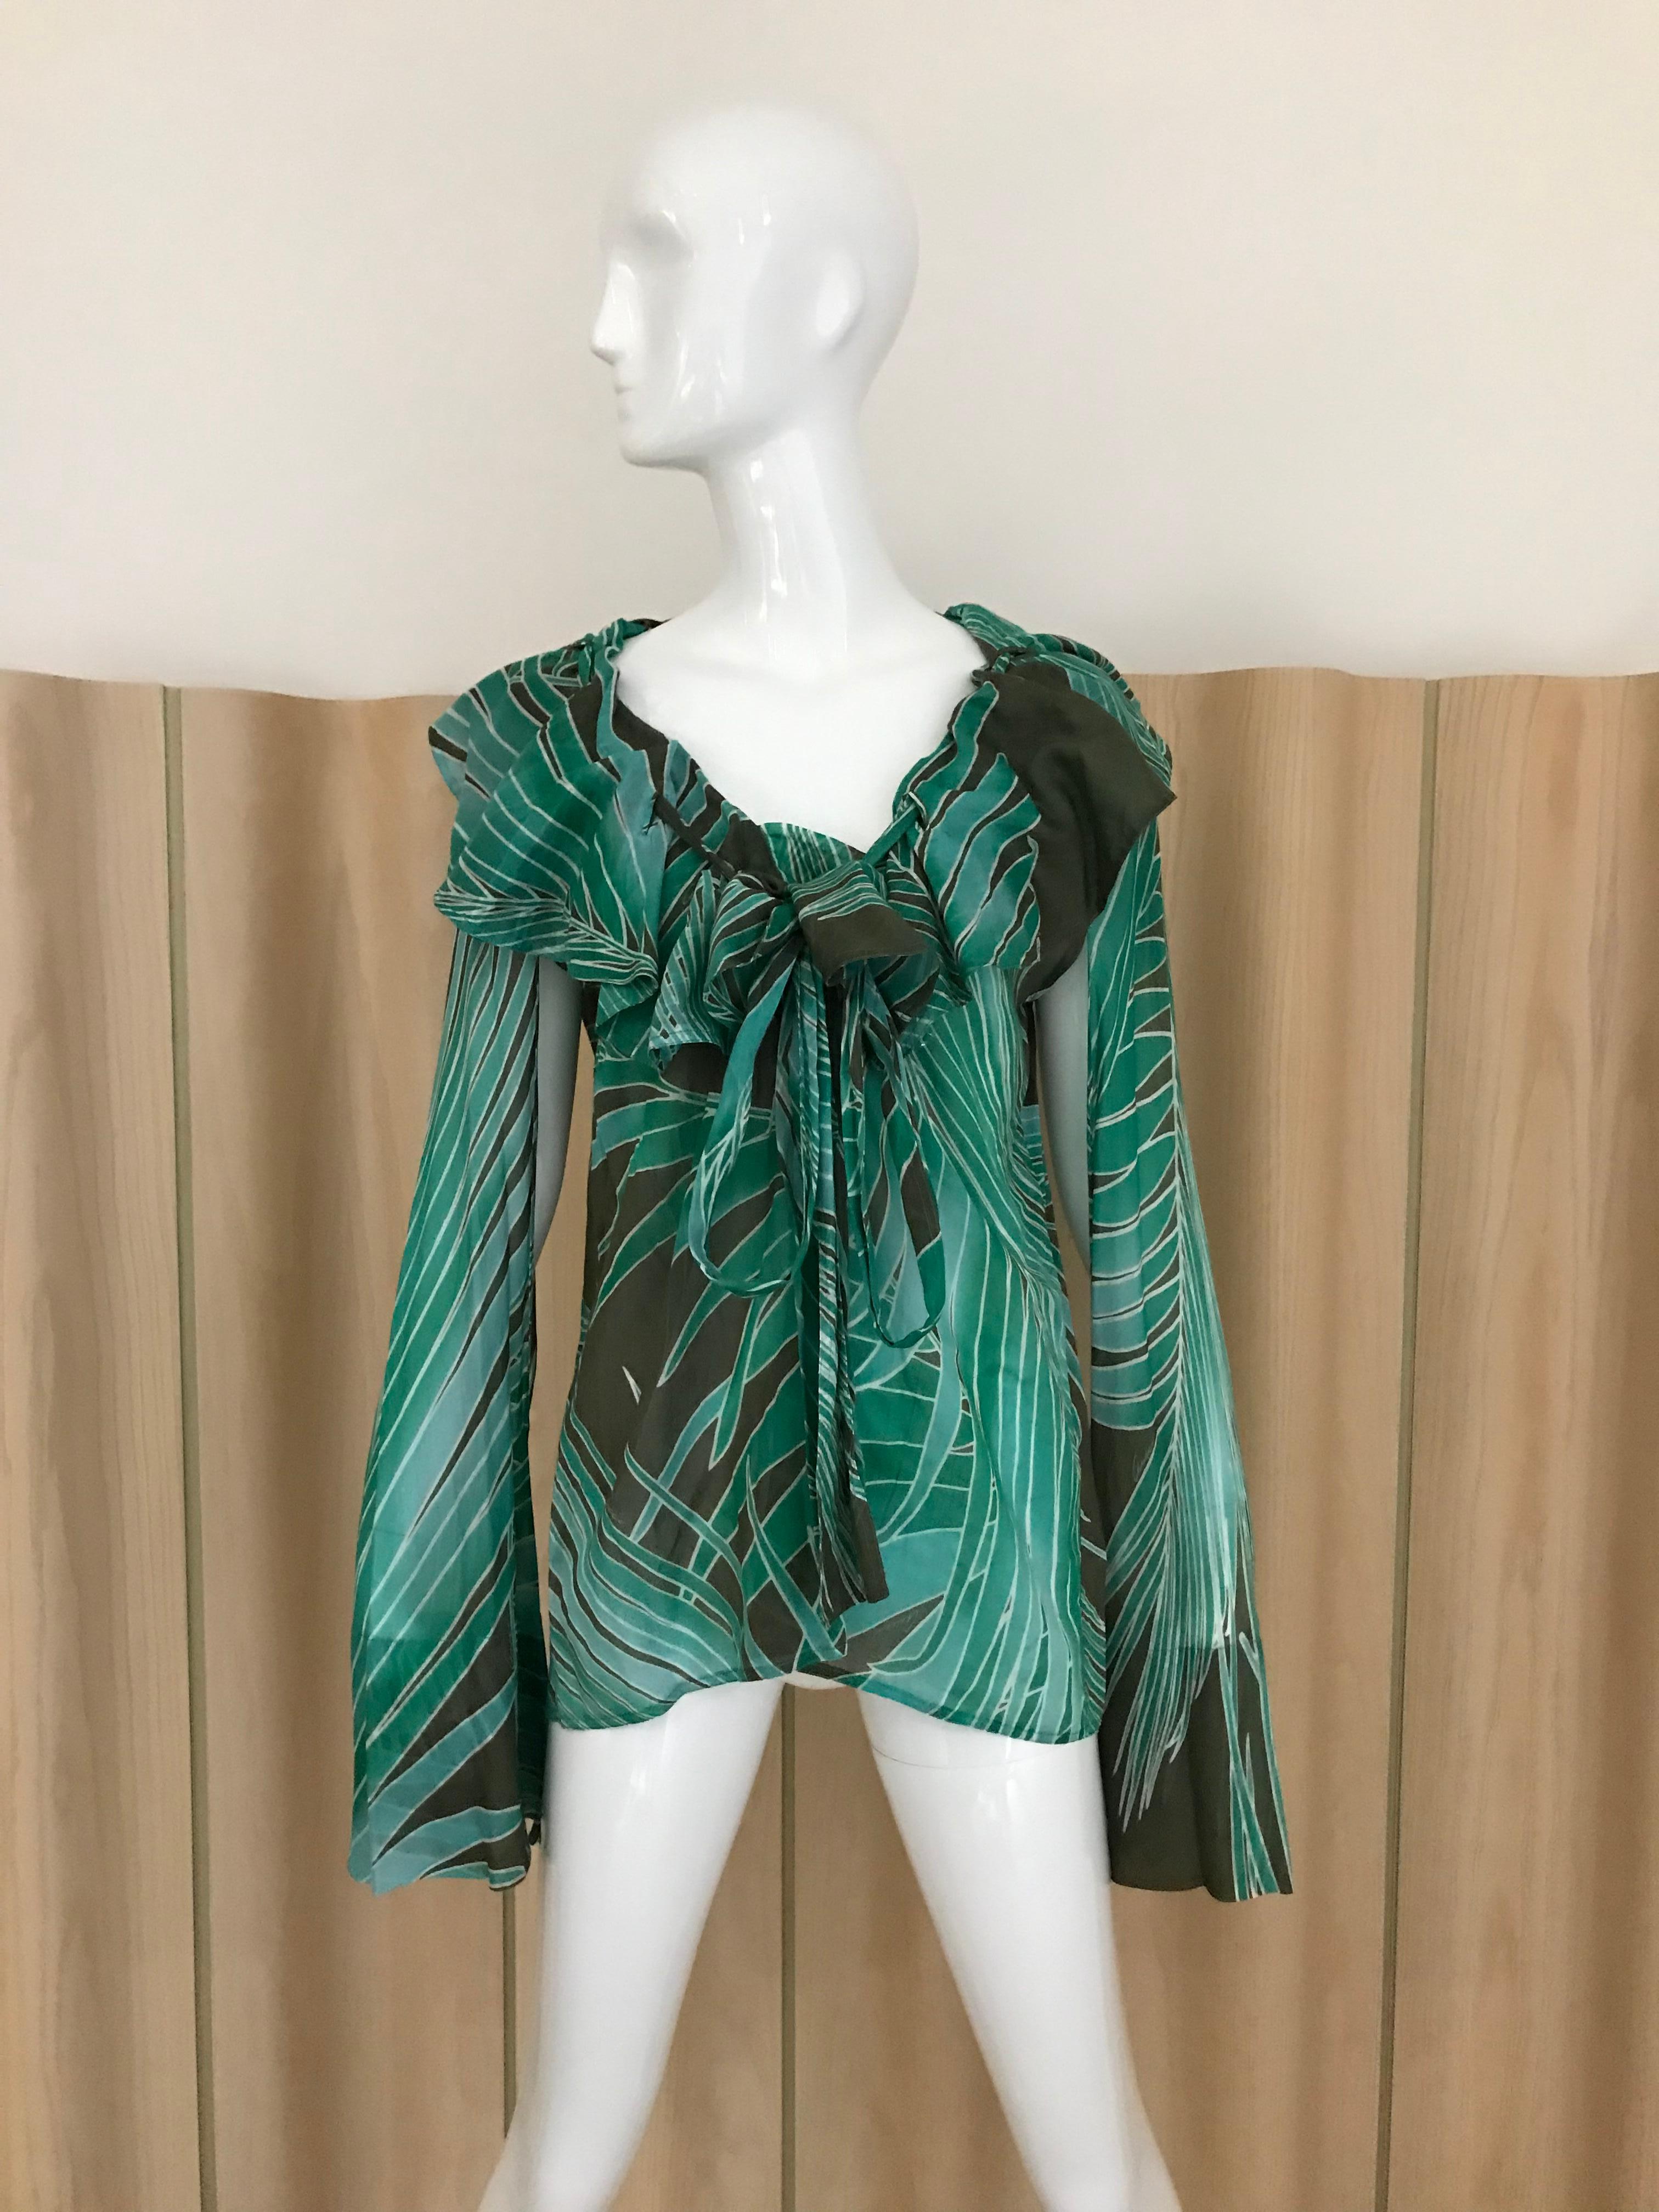 Gucci by Tom Ford Green , brown and white Leaf print cotton long sleeve blouse with adjustable neckline.
Size: Large 
Bust: 38 inches/ Waist: 38 inches/ Hip: 44 inches/ Blouse length: 27 inches/ sleeve: 28 inches
The sleeve has an 11 inches cut out.